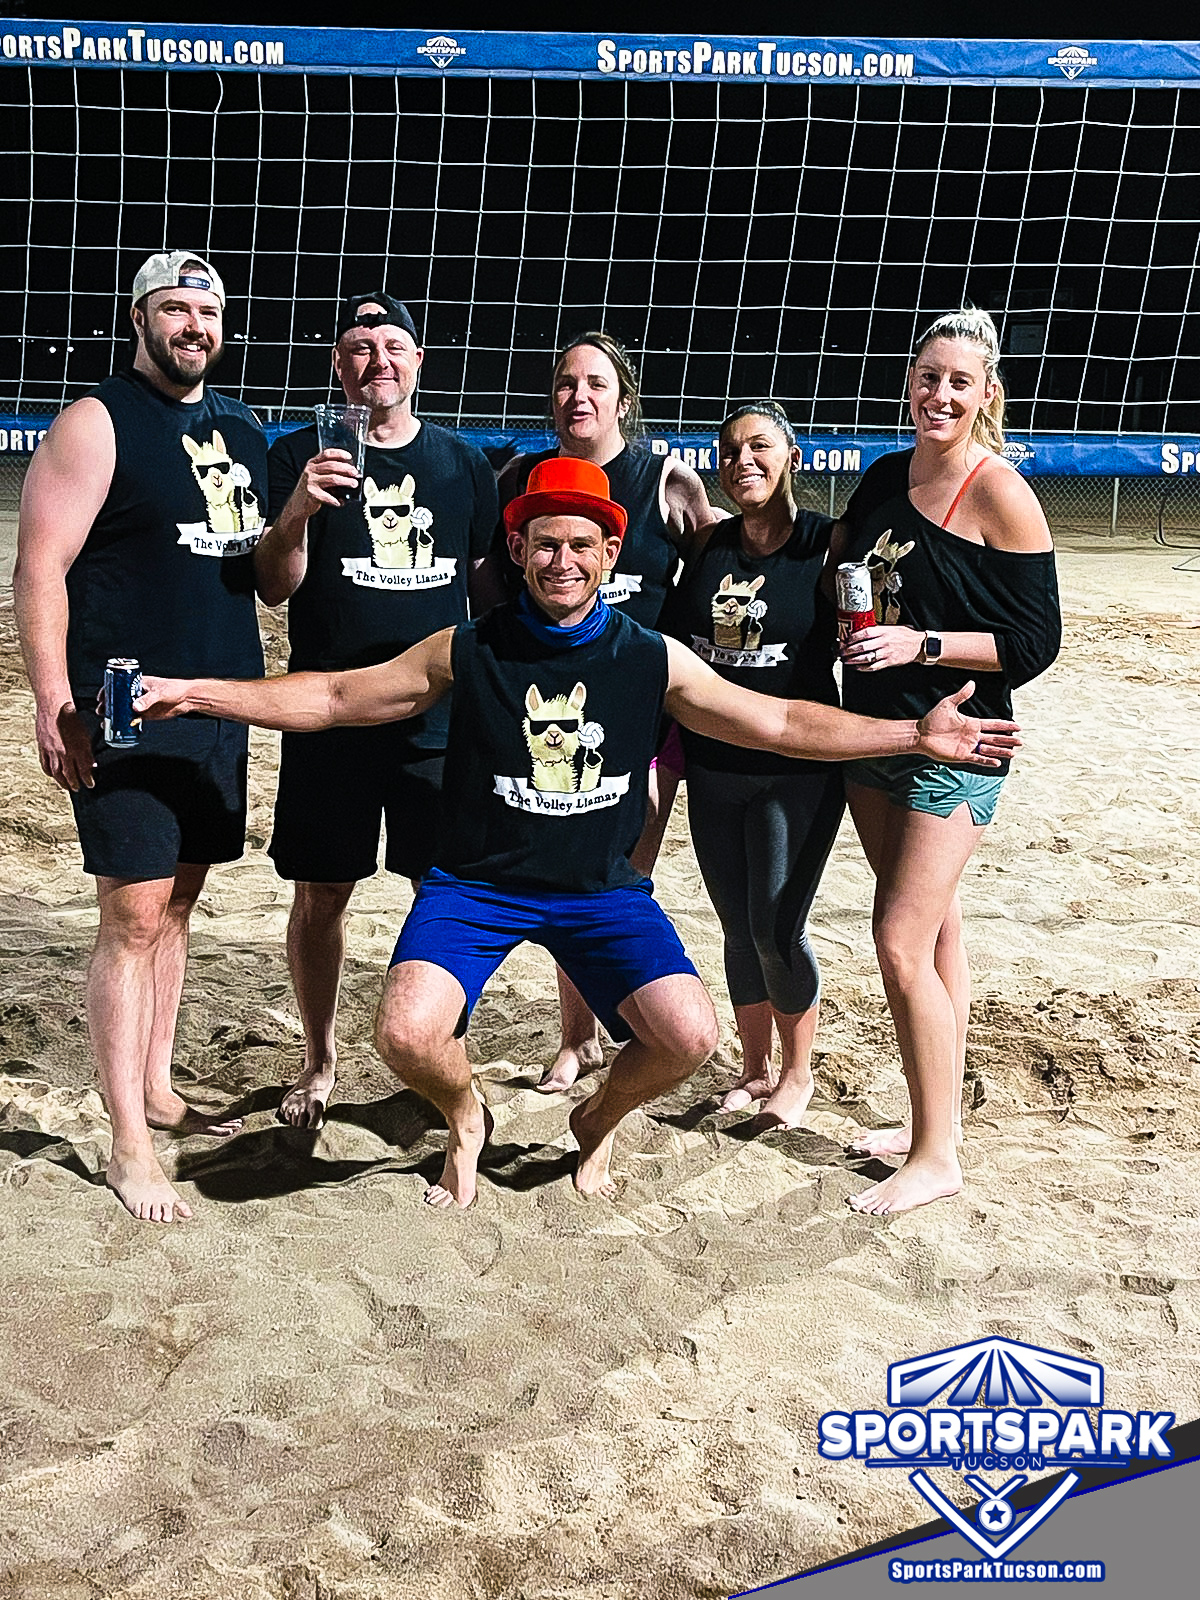 Volleyball Wed Co-ed 4v4 - C, Team: The Volley Llamas